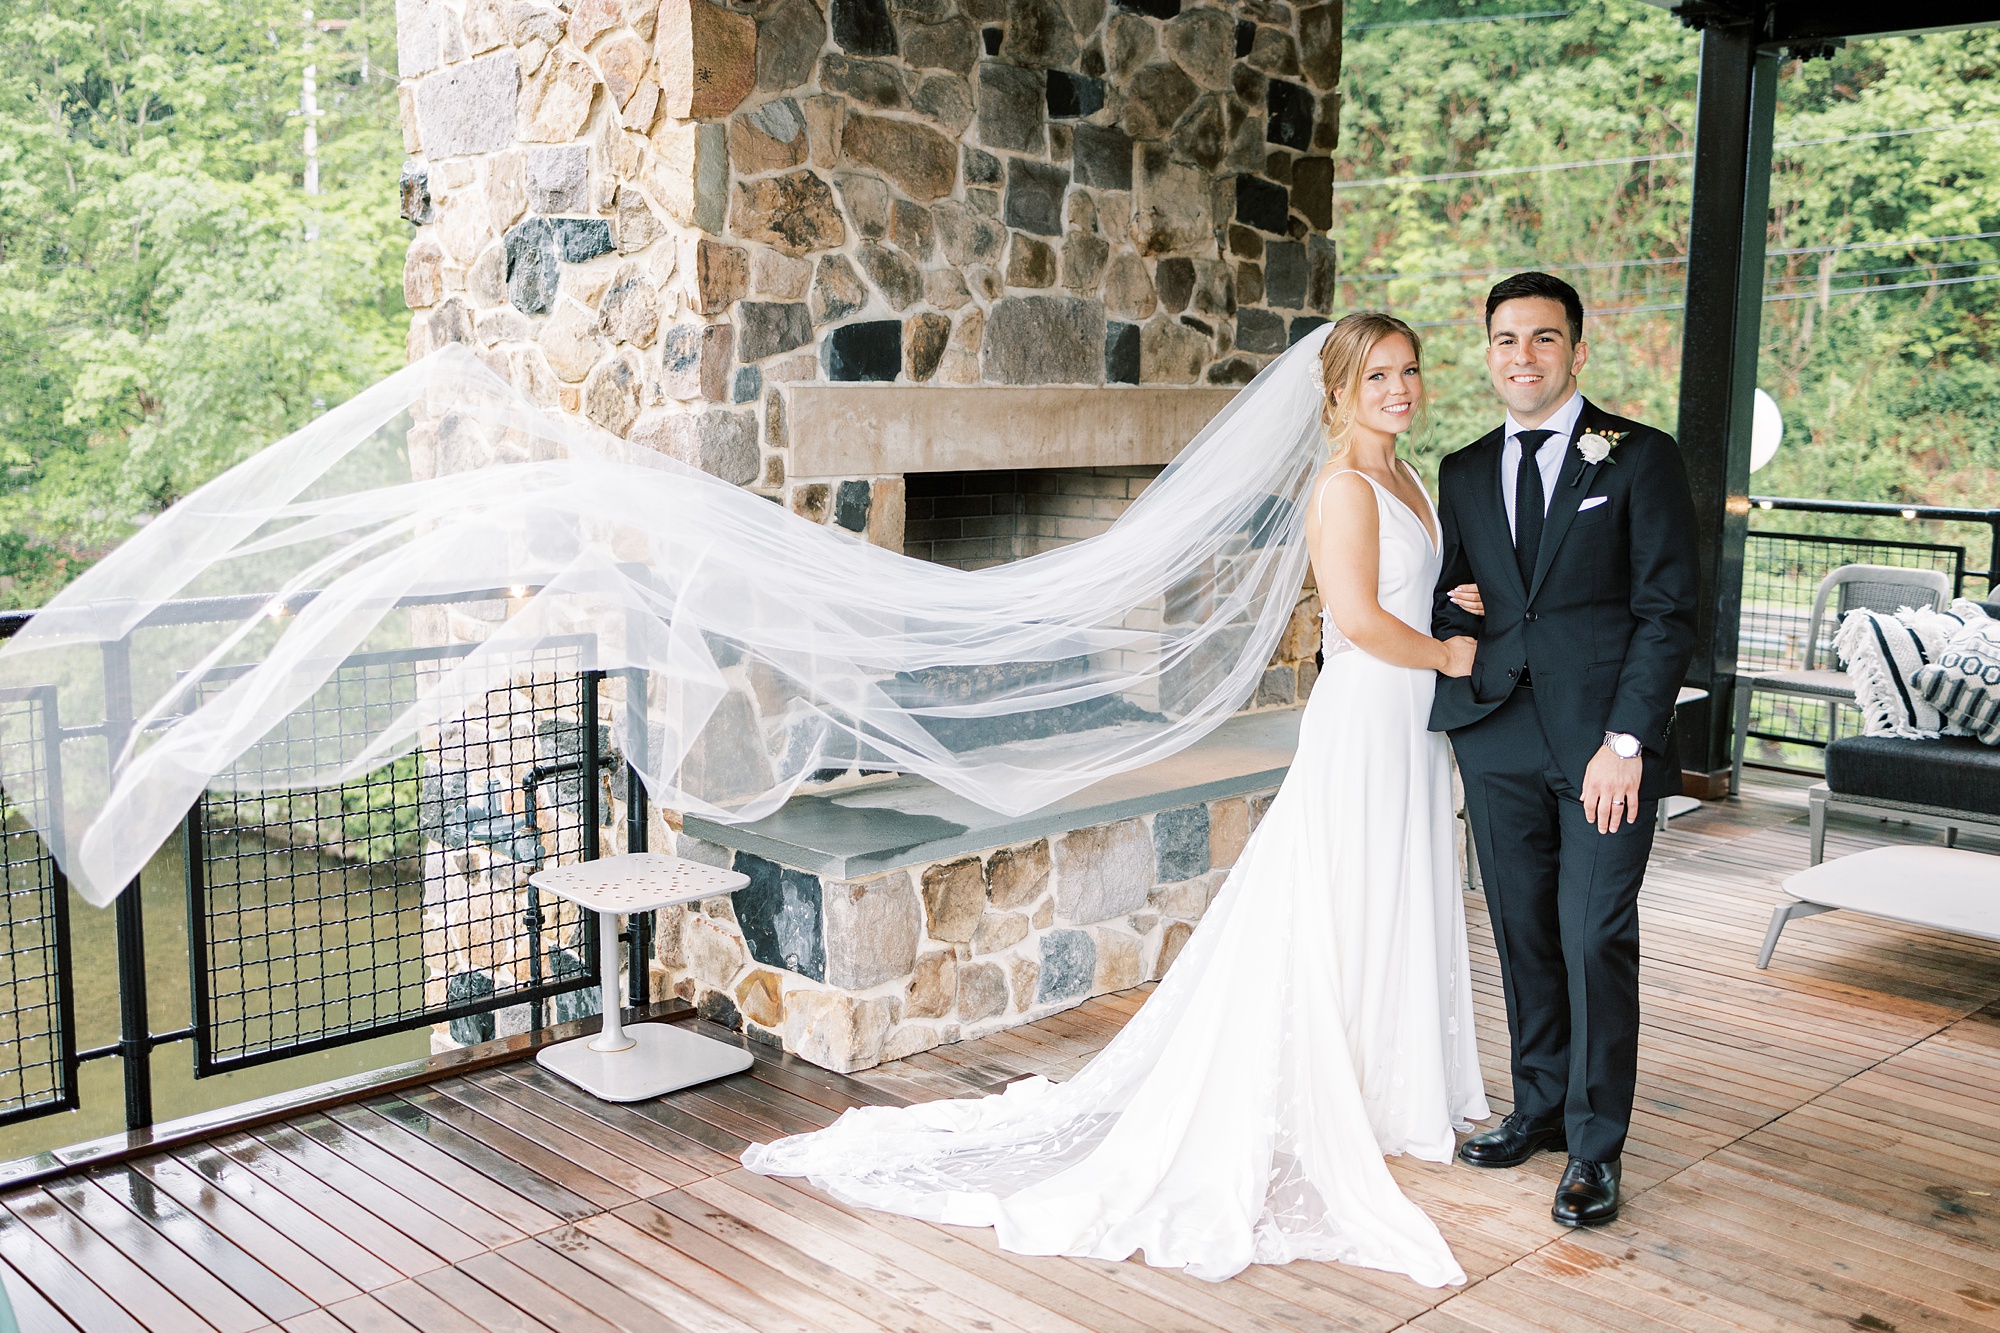 bride and groom pose by stone fireplace while bride's veil floats behind them